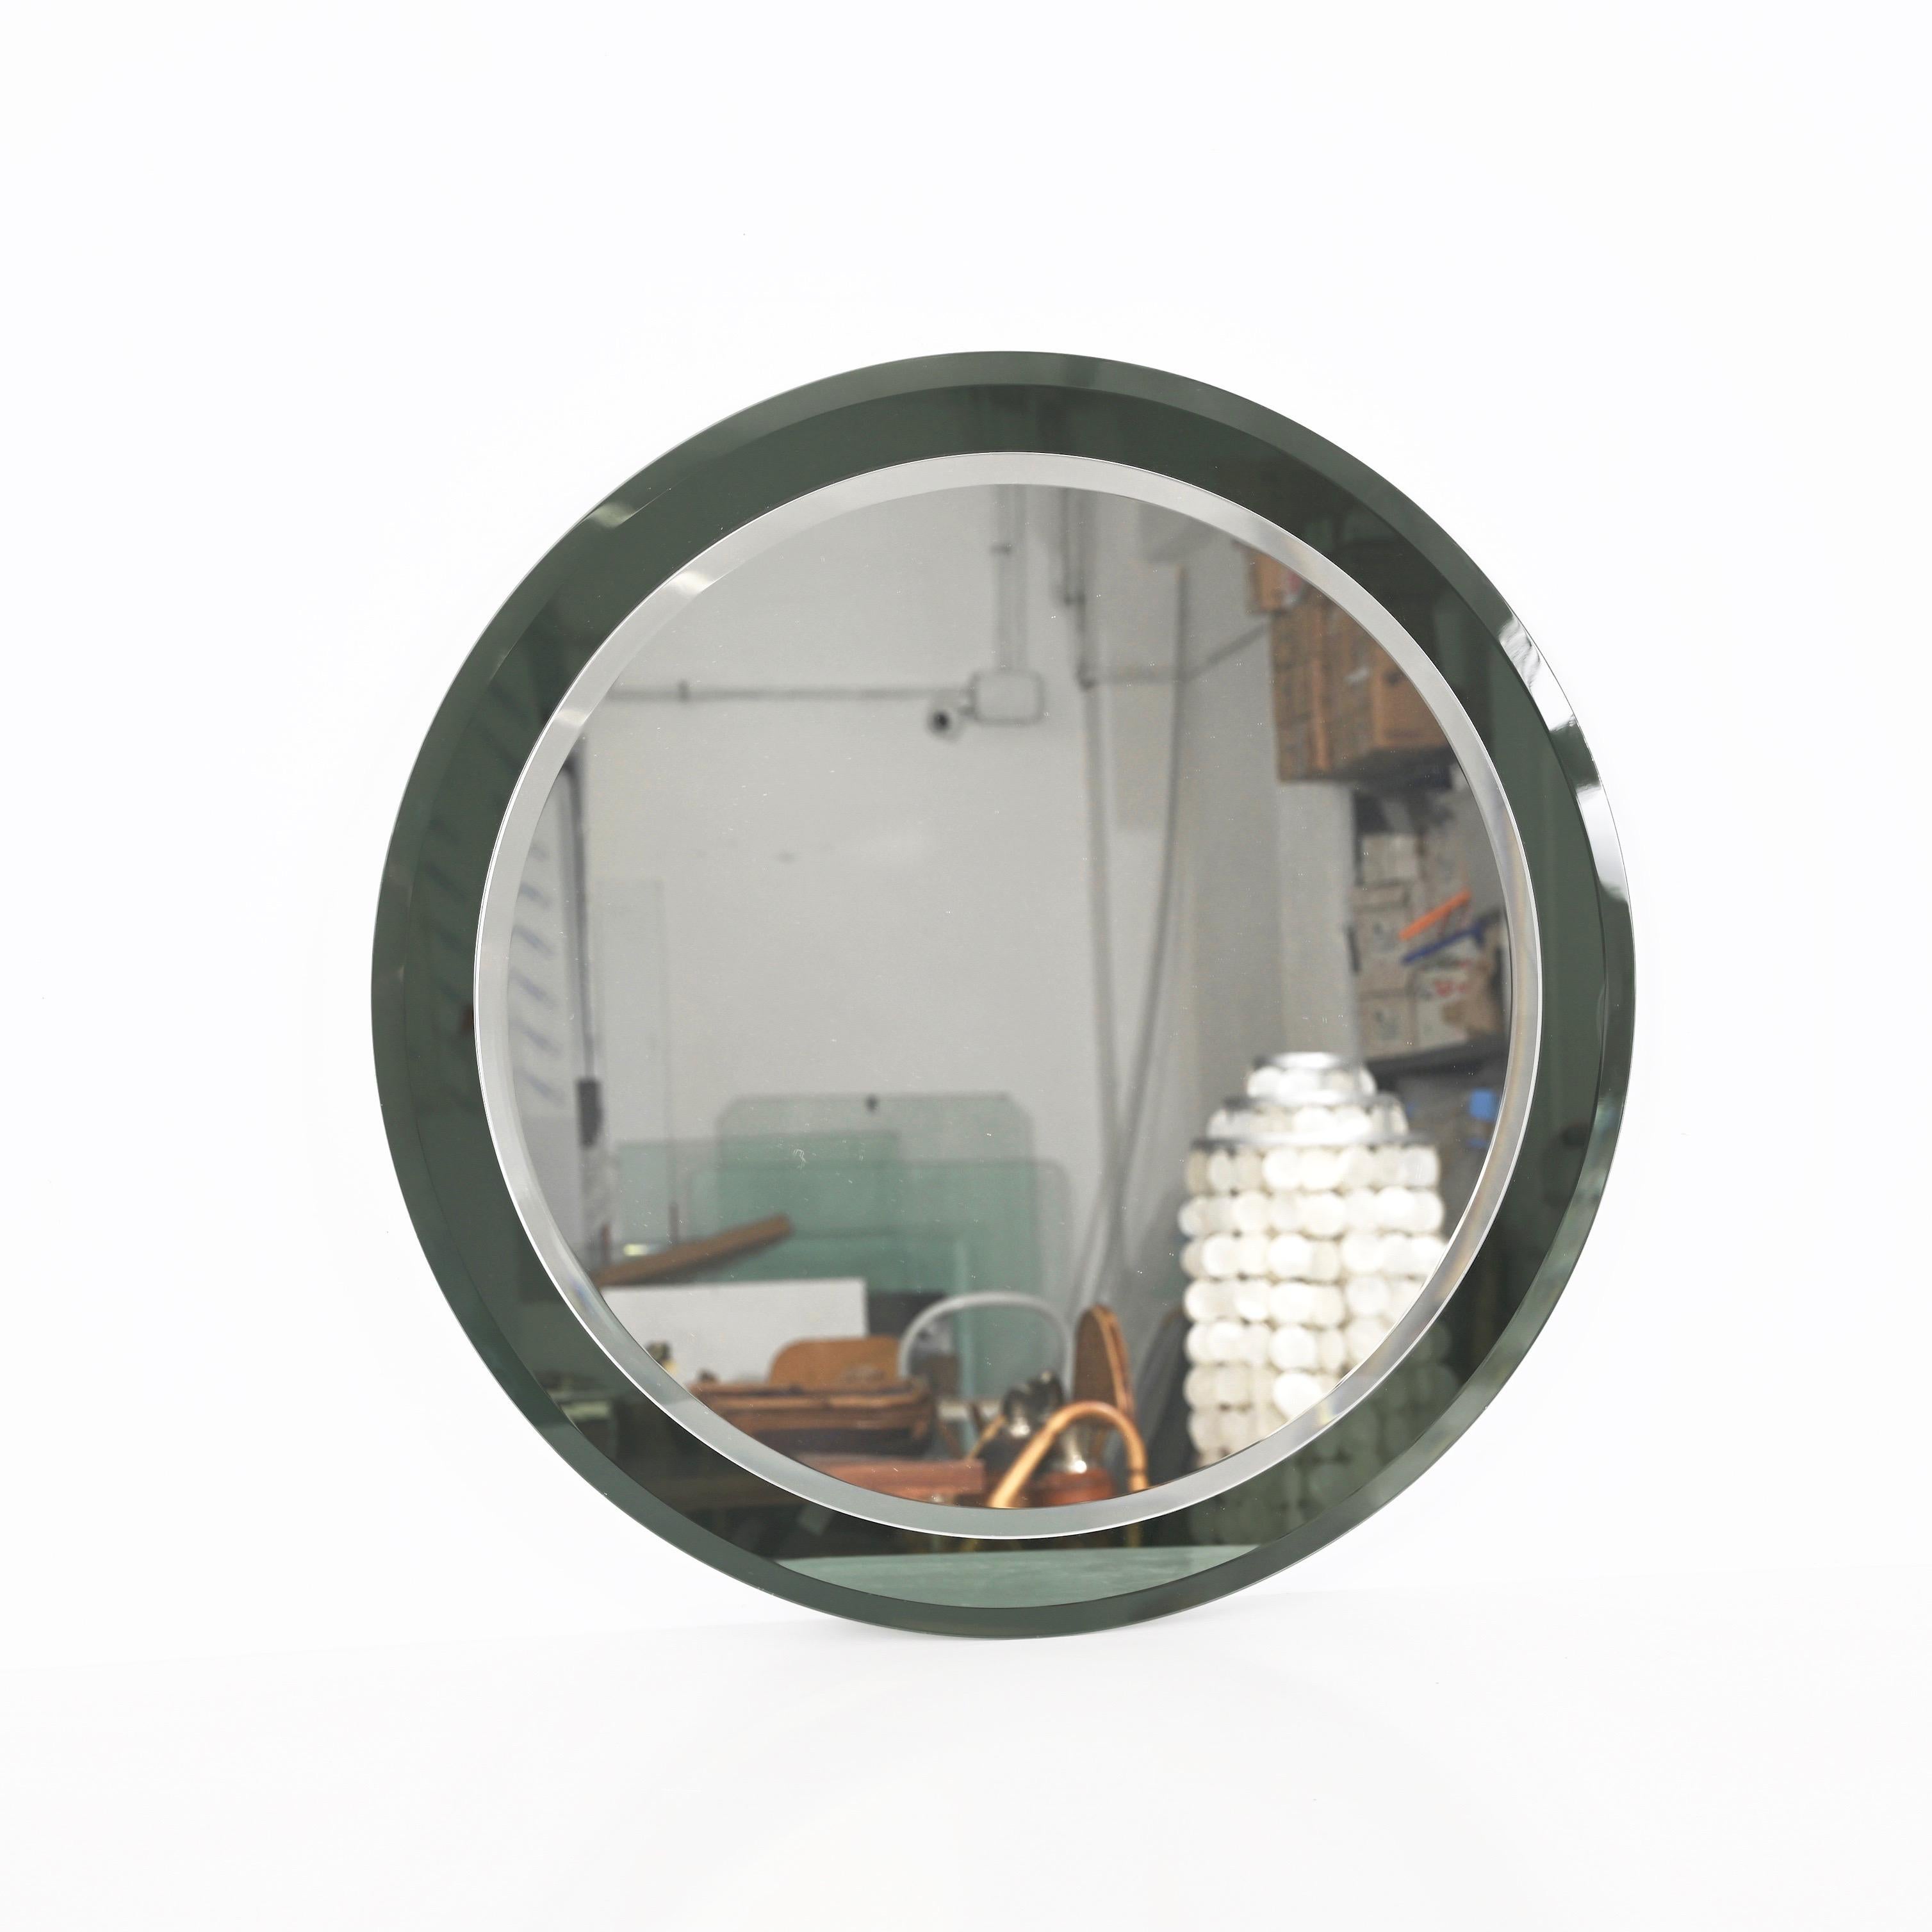 Striking mid-century double bevelled round mirror. This fantastic object was produced in Italy in the 70s by Metalvetro.

The mirror features an extraordinary mirrored glass frame in an olive green color that fades to a light grey depending on the